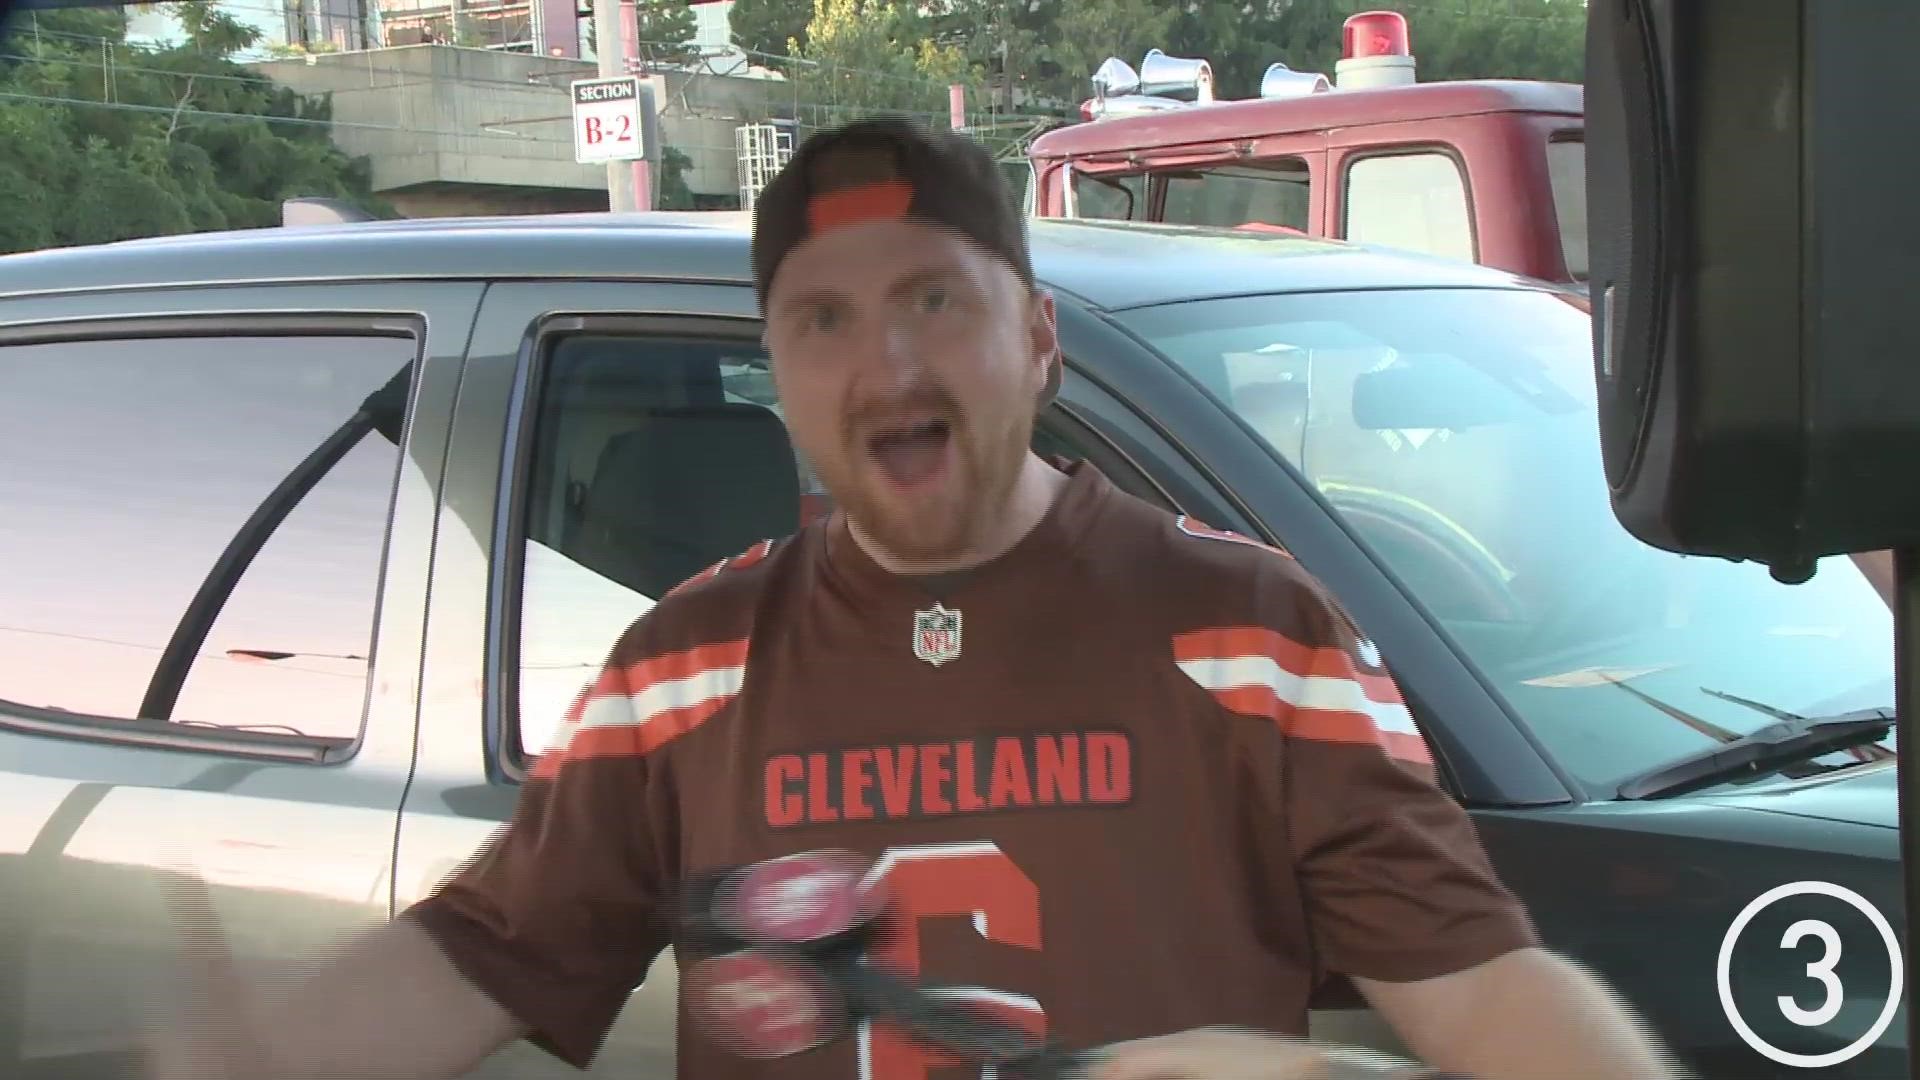 Check out the sights and sounds from our die-hard Cleveland Browns' fans!